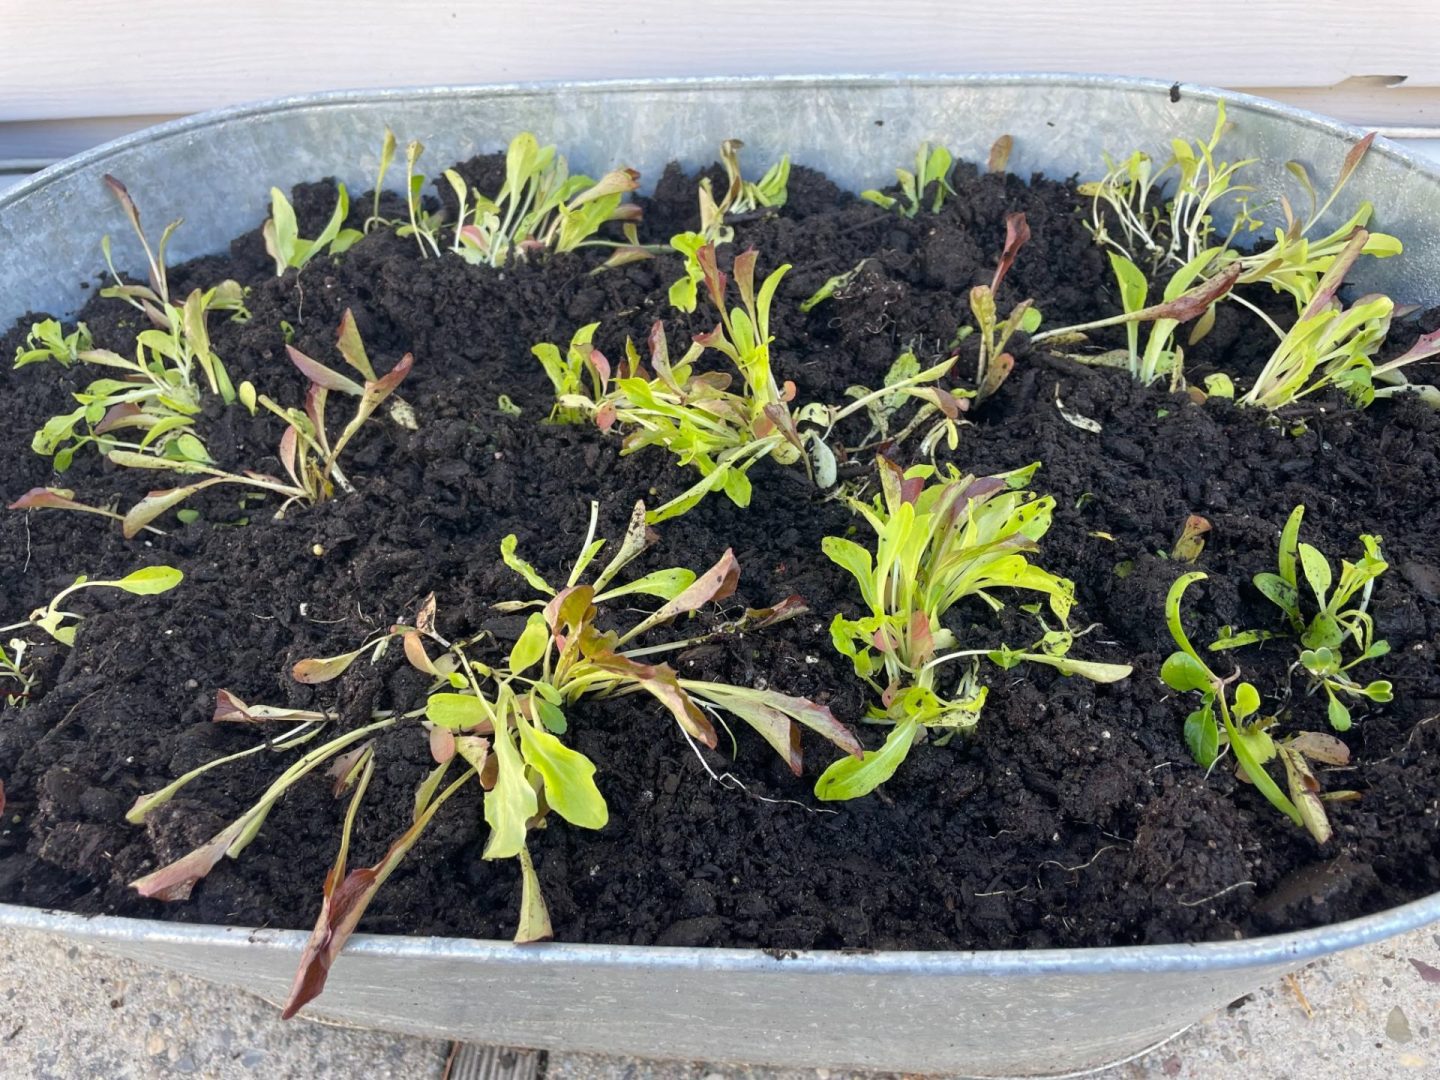 Salad mix transferred into a container. They are planted in clumps.